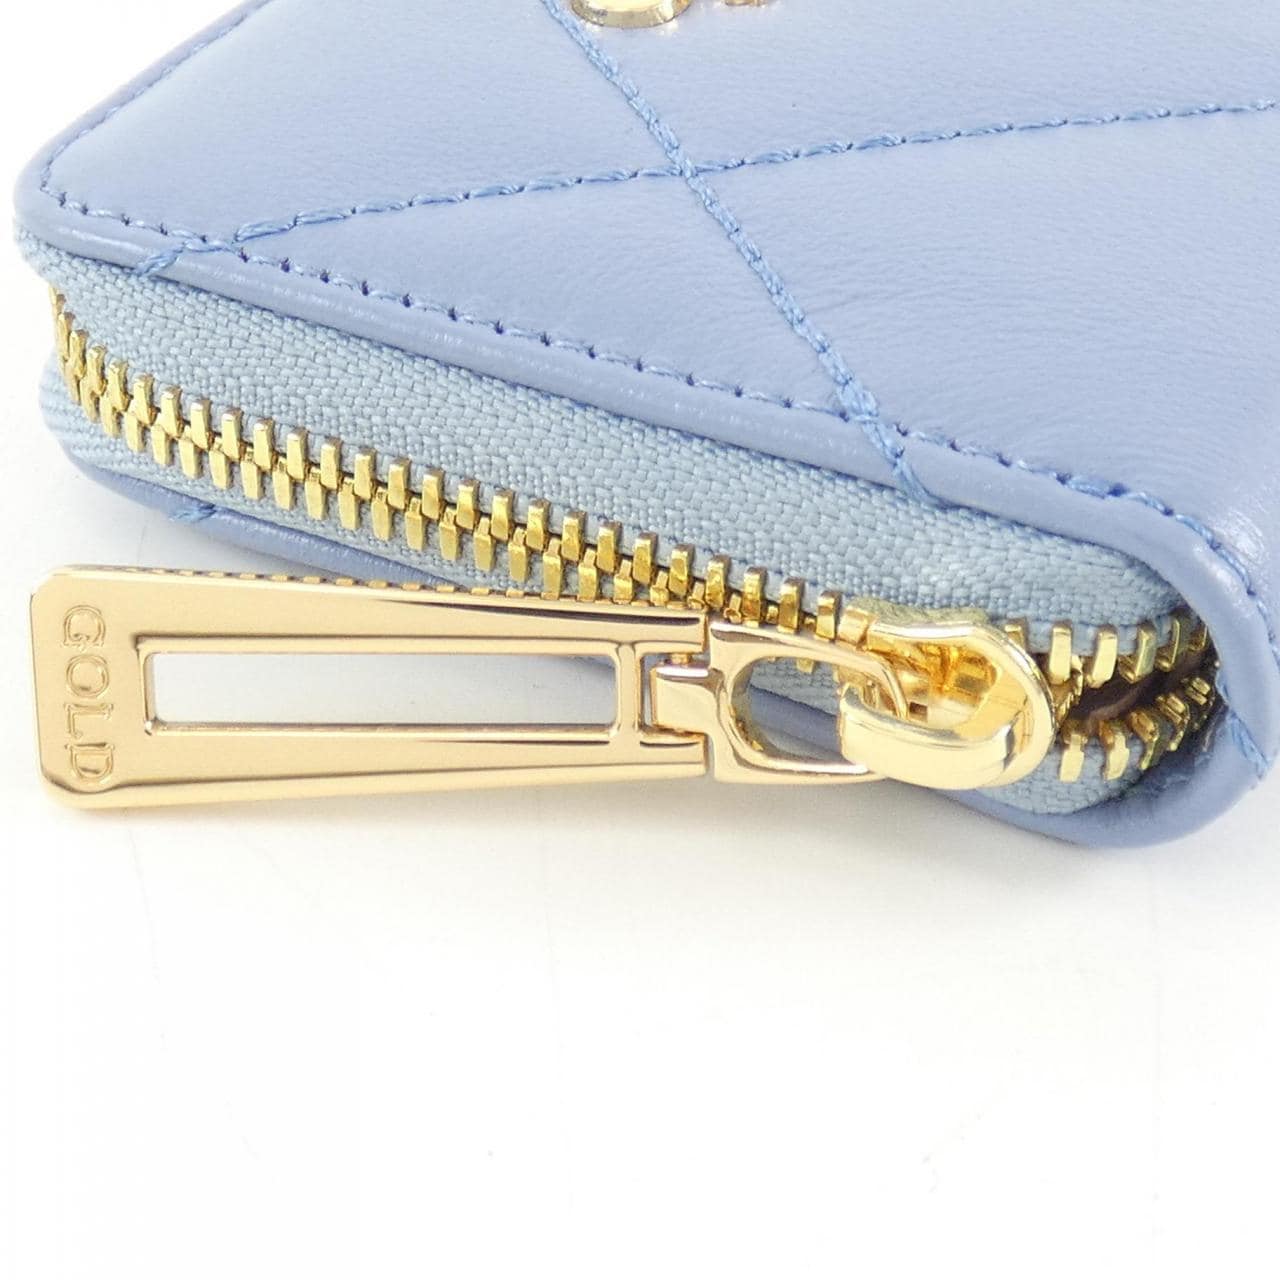 COCOCELUX GOLD GOLD COIN CASE